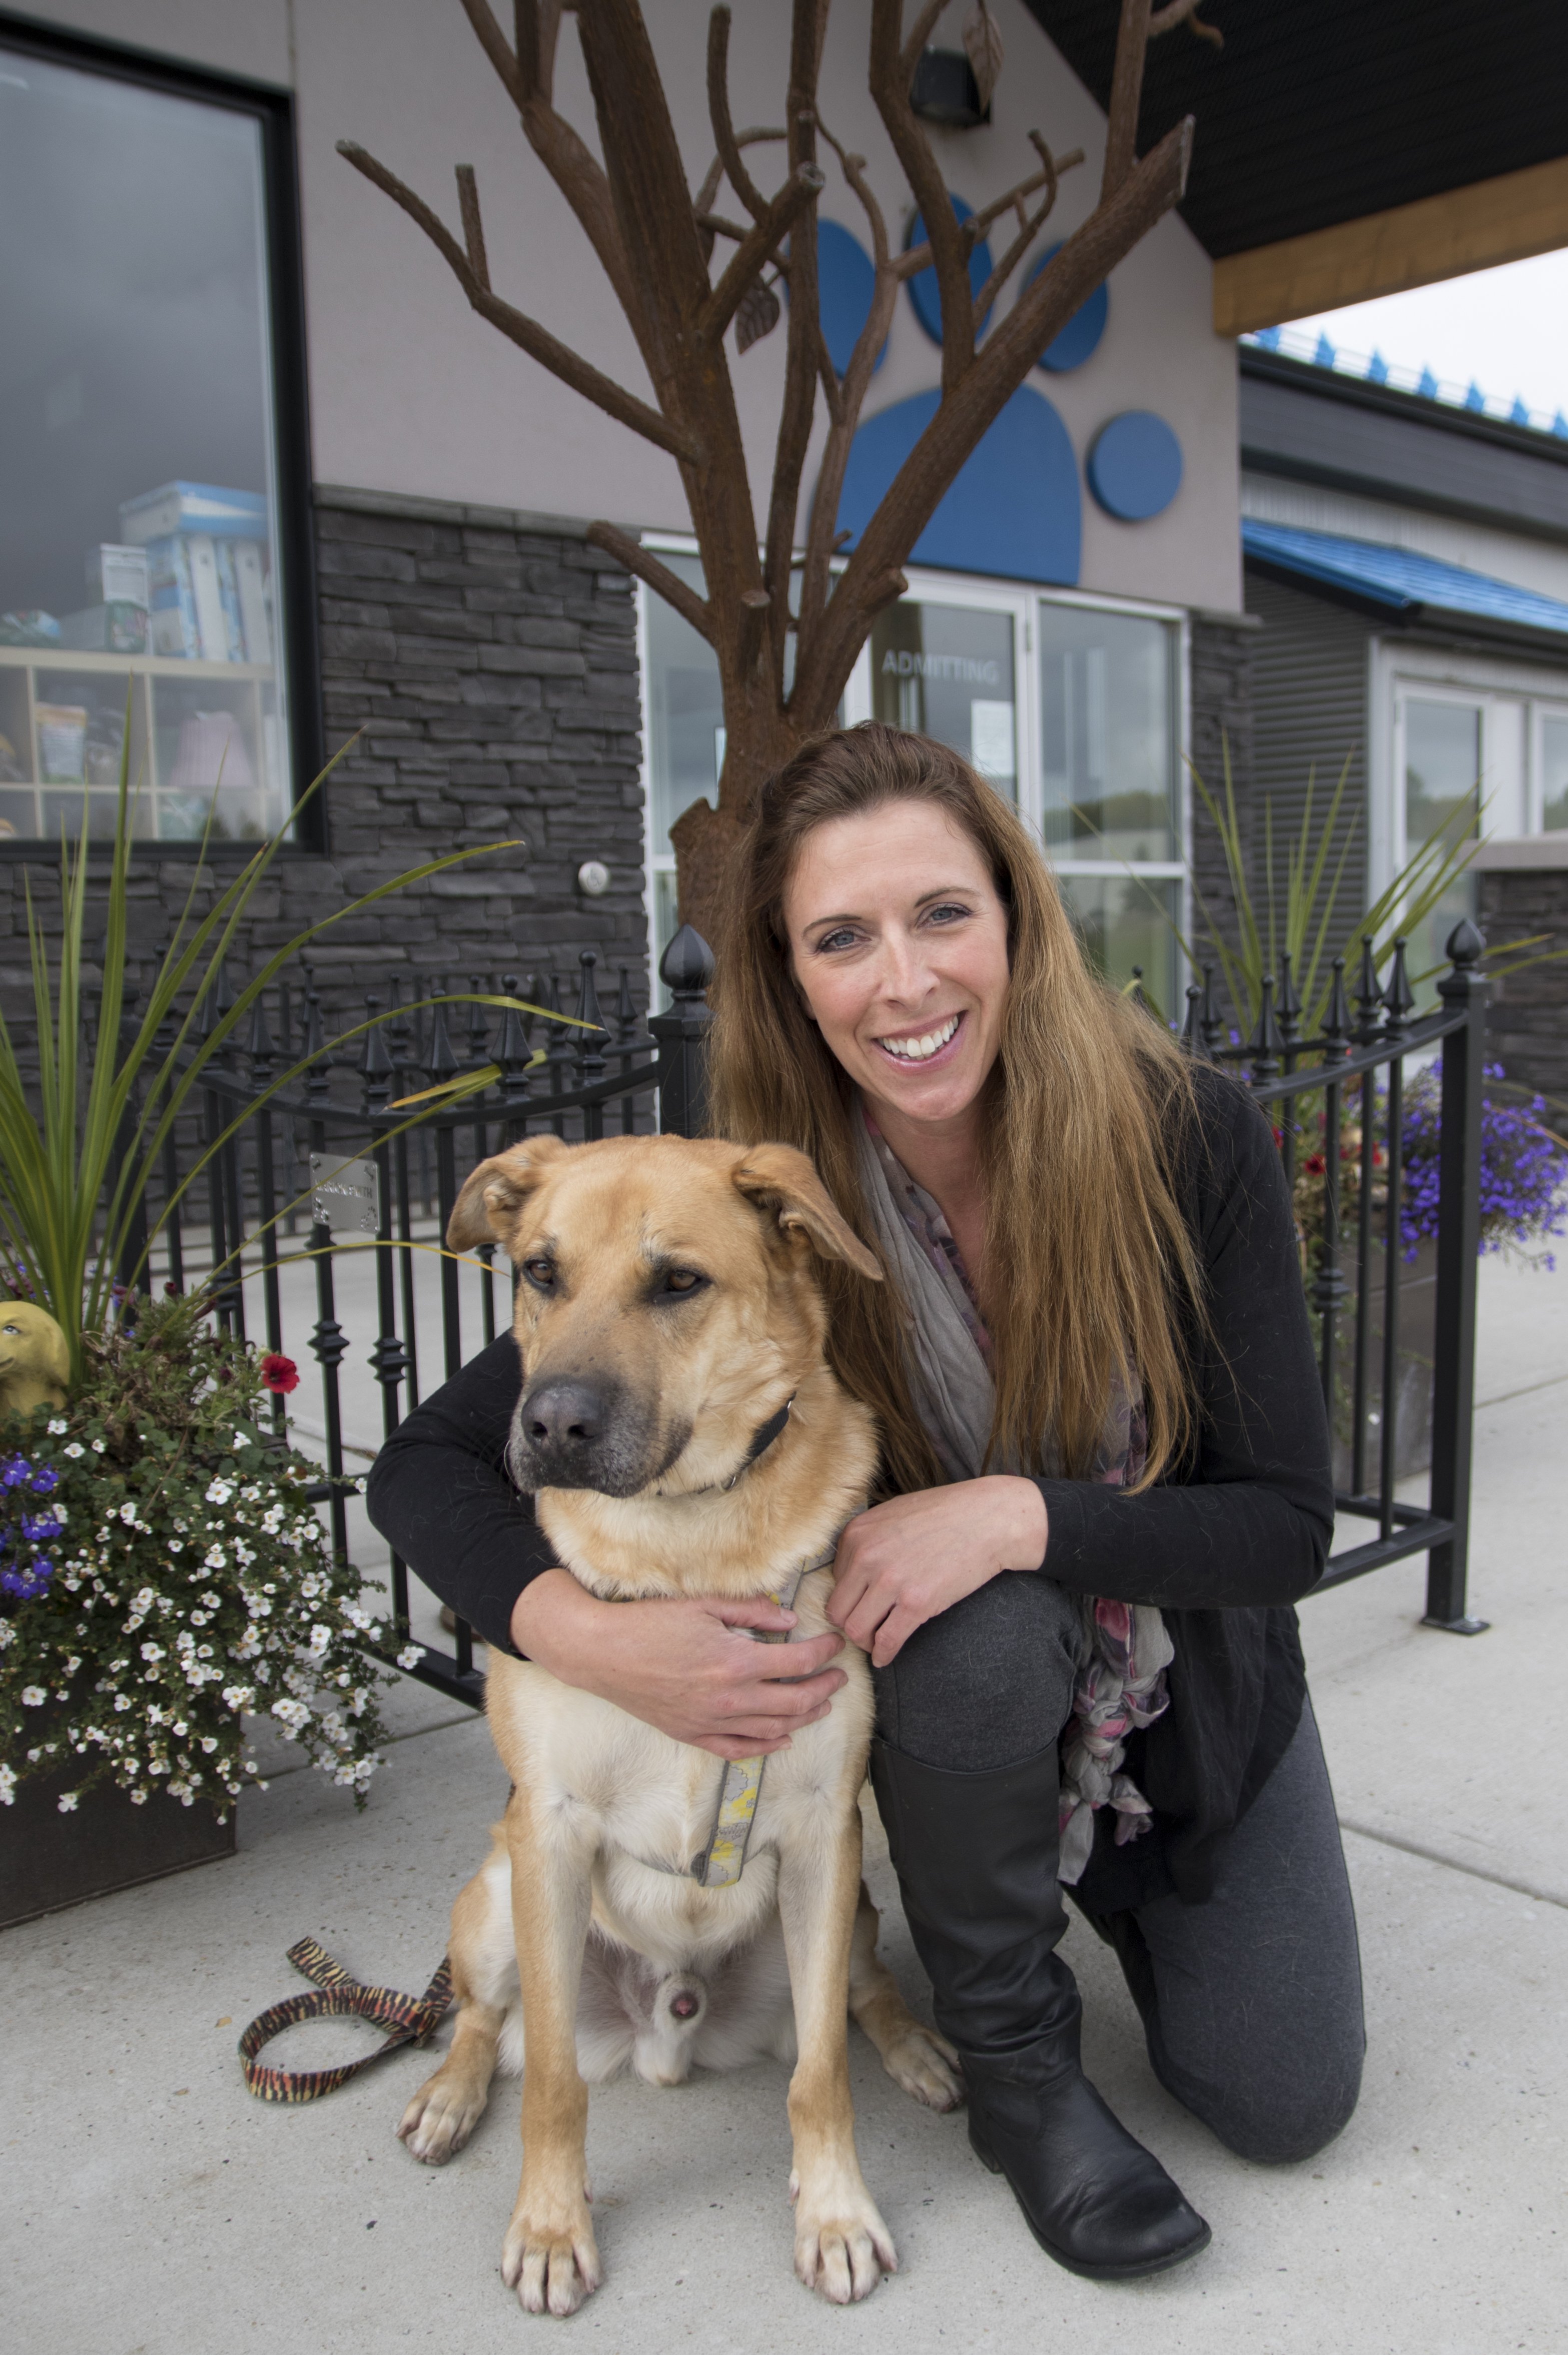 TAKING A REST – Red Deer and District SPCA Executive Director Tara Hellewell and rescue dog Tommy take a moment in front of the new memorial tree at the Red Deer SPCA